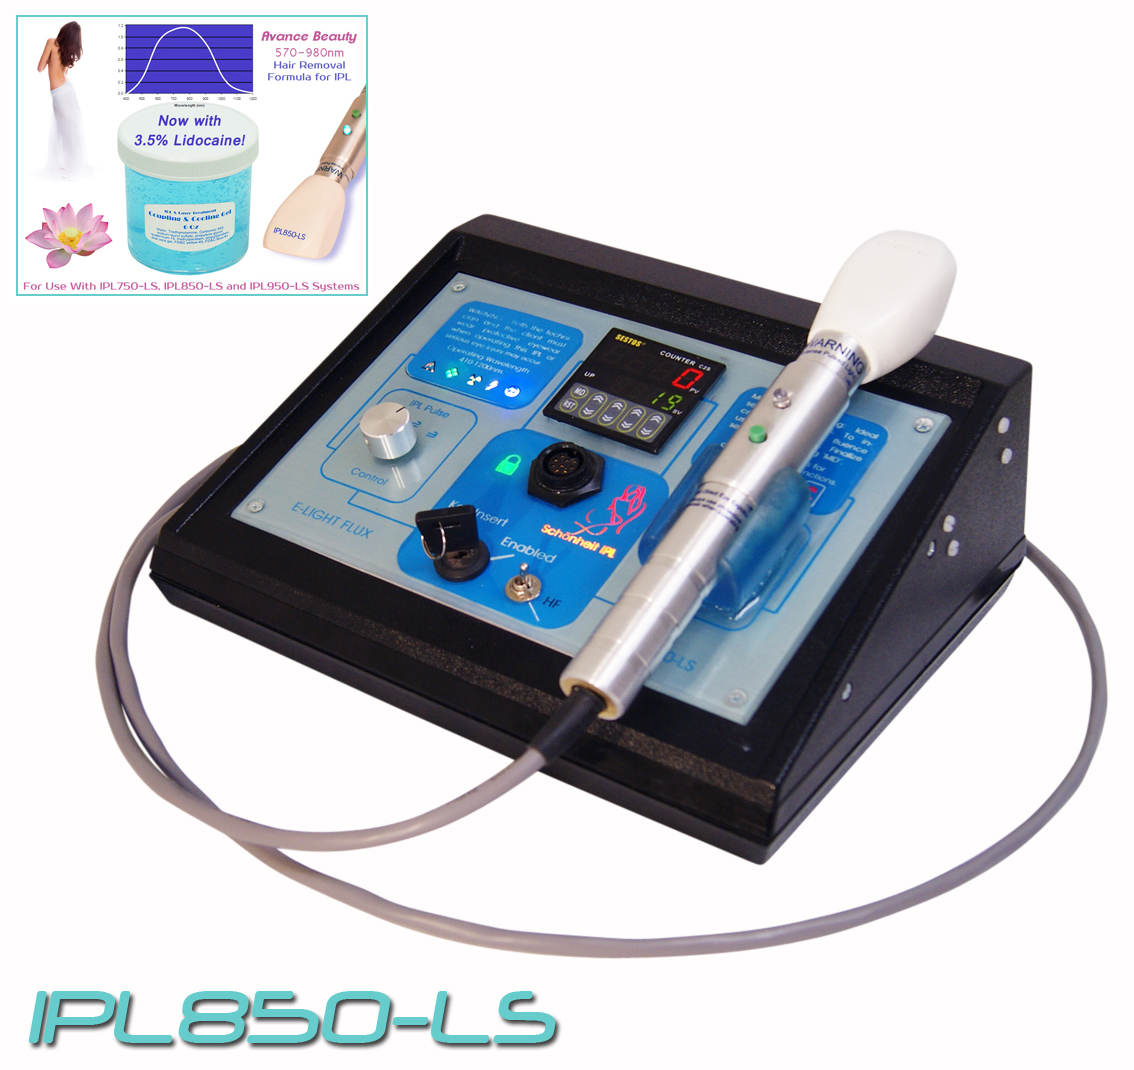 IPL850-LS Permanent Hair Removal 570-980nm Beauty Treatment Equipment, Machine, System, Device.  642057128551